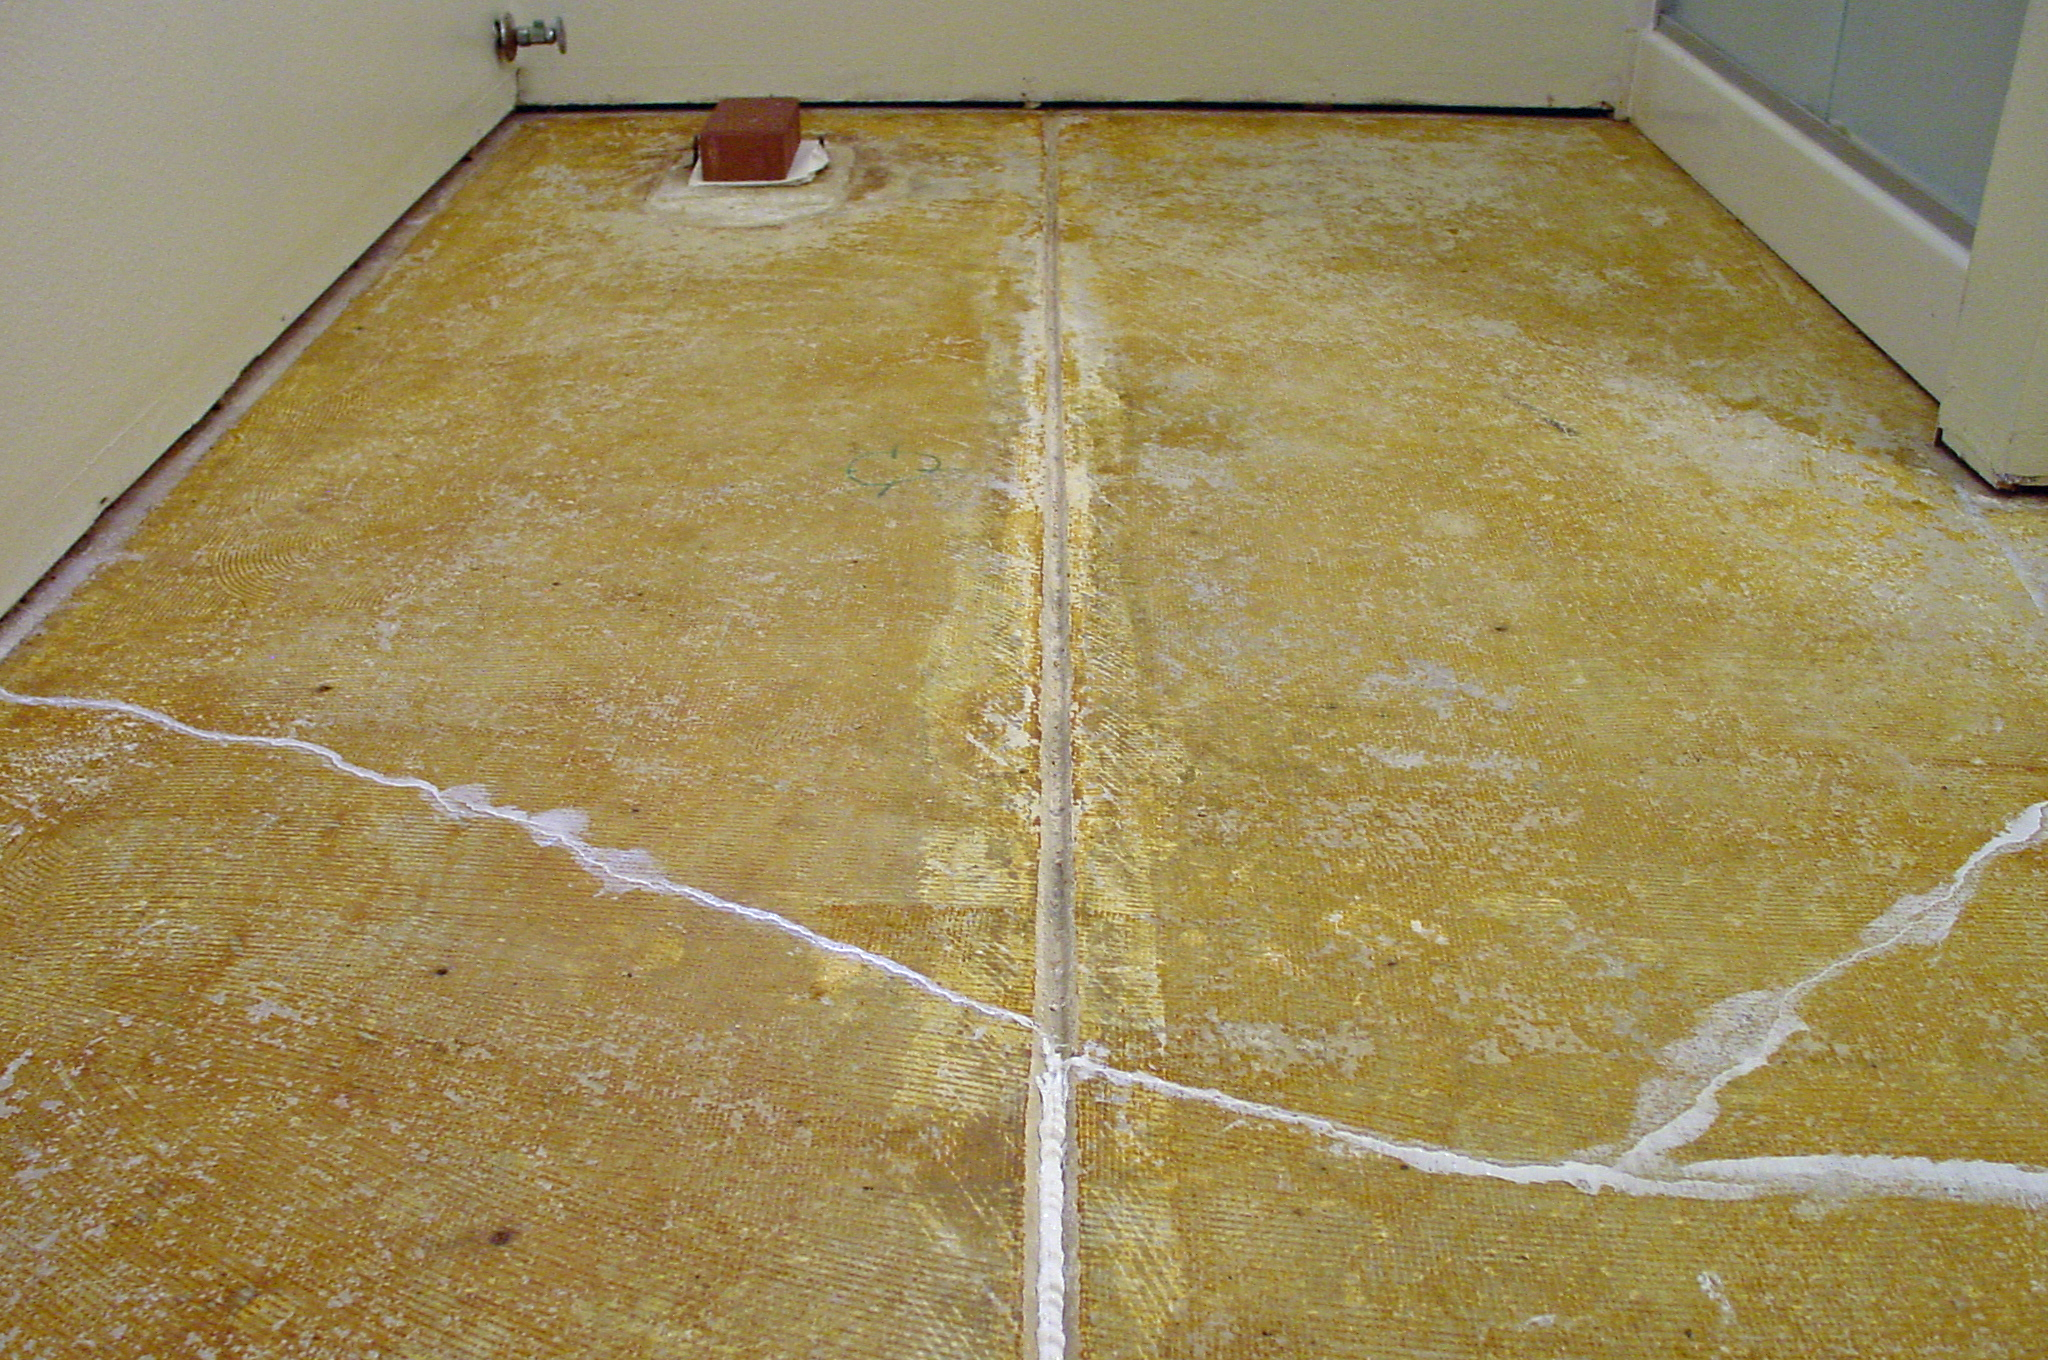 How To Lay A Floating Porcelain Or Ceramic Tile Floor Over A Concrete Slab That Has Cracks Contraction Joints Or Expansion Joints,Painted Wood Ceiling Ideas